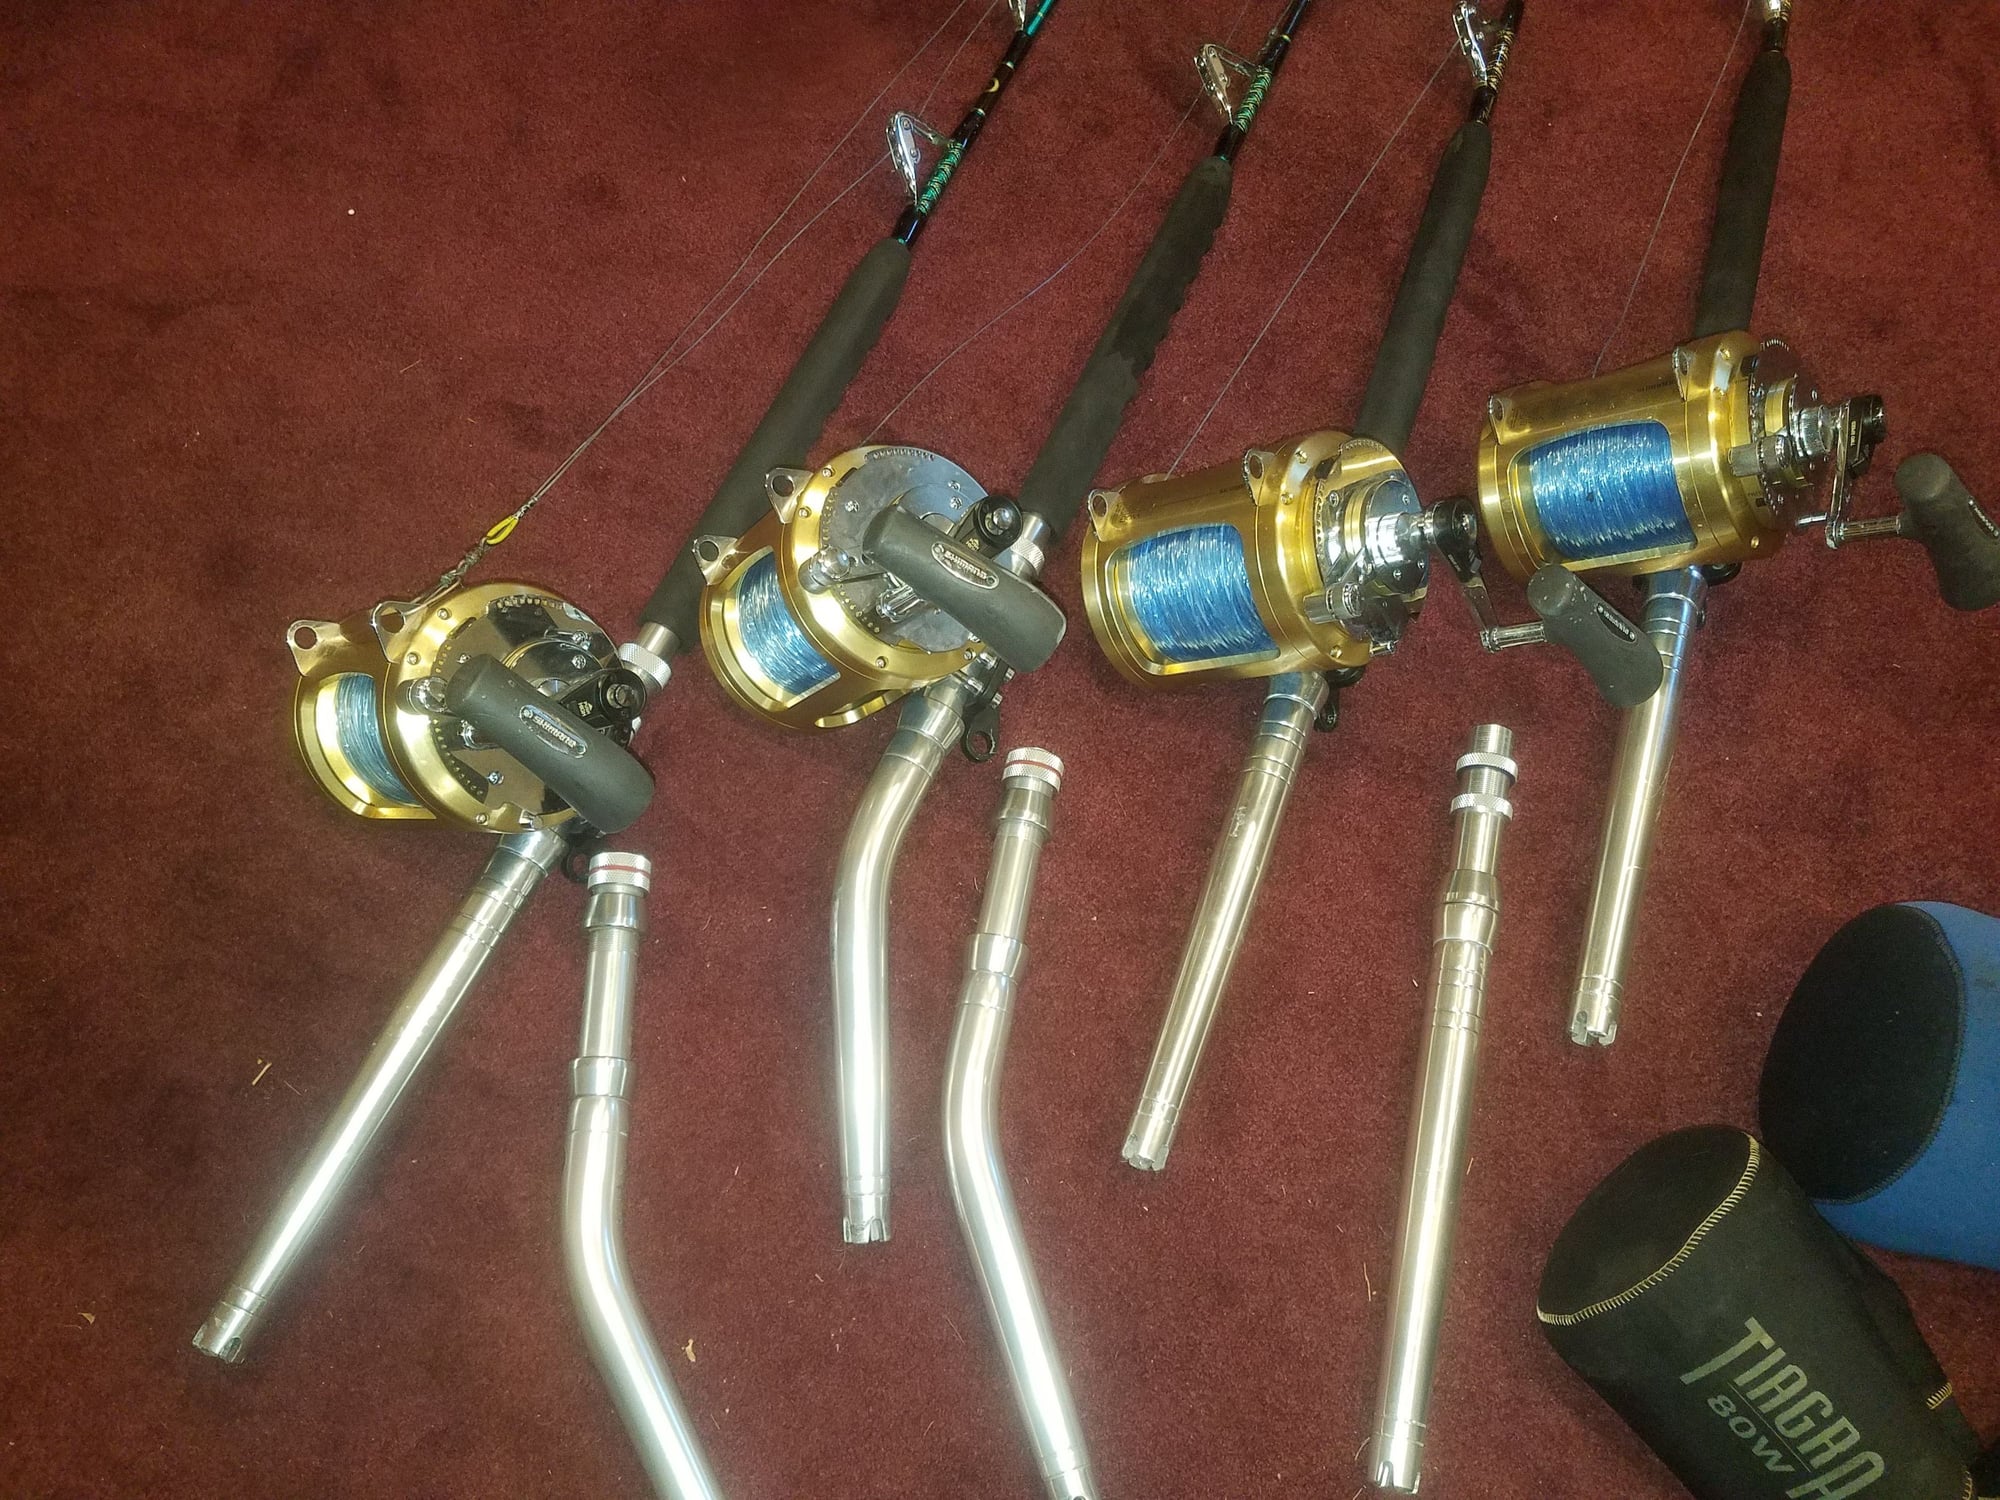 4 Shimano tiagra 80w reels mounted on Fishermans Outfitters short stroke  standup rods - The Hull Truth - Boating and Fishing Forum